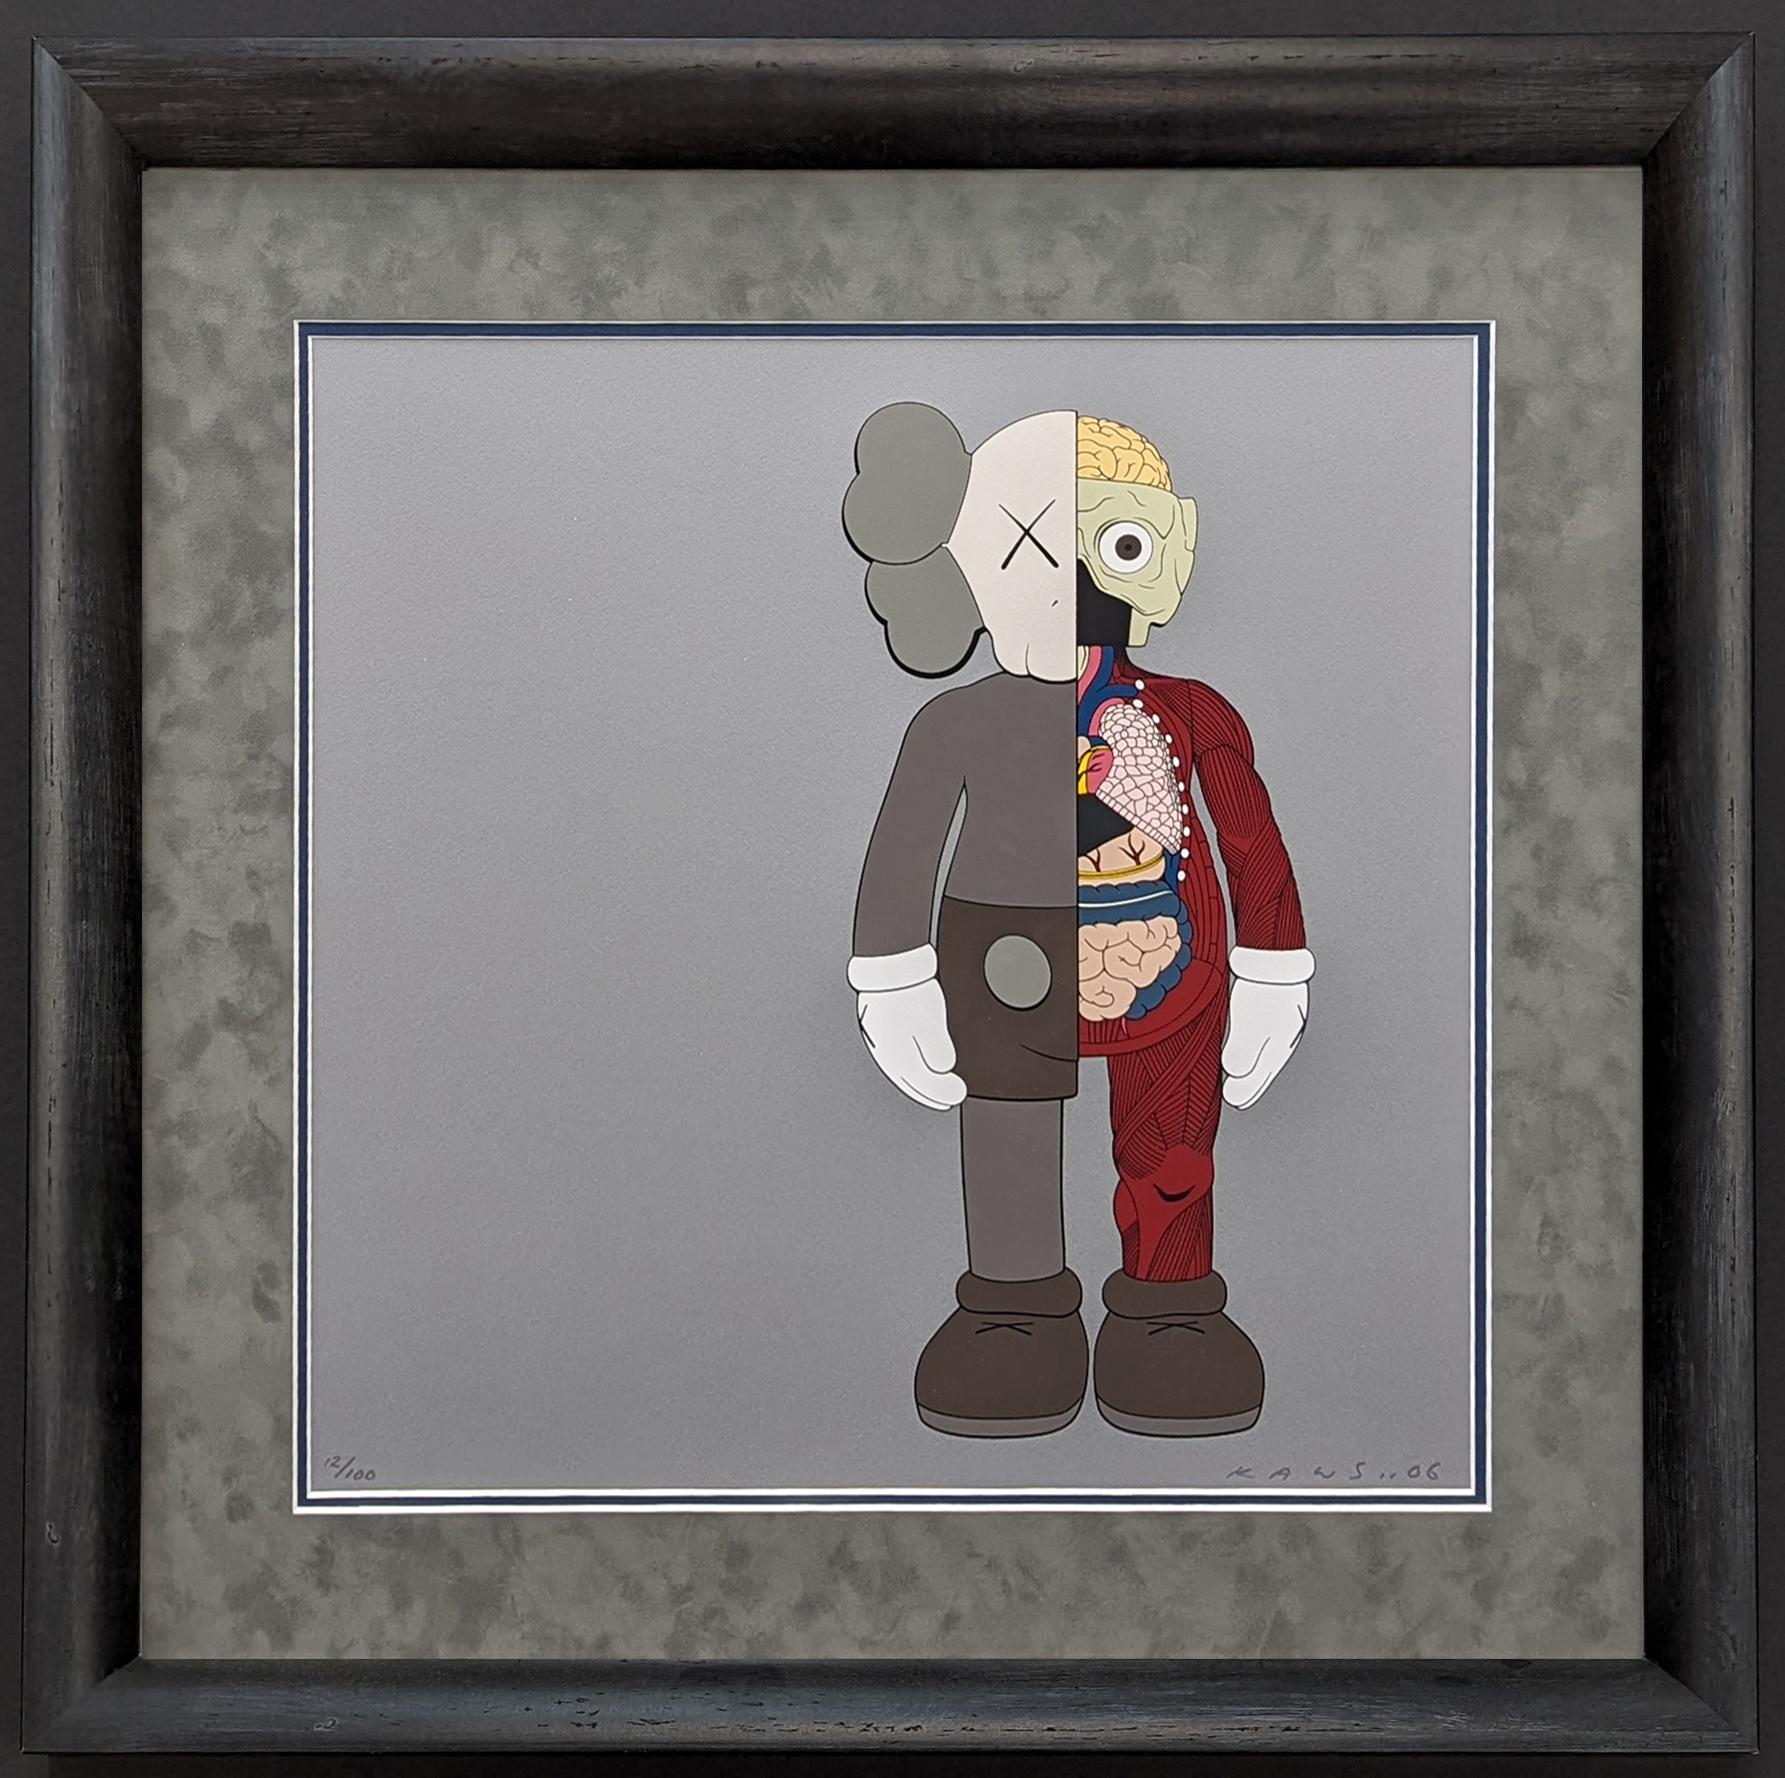 KAWS Abstract Print - DISSECTED COMPANION (BROWN)